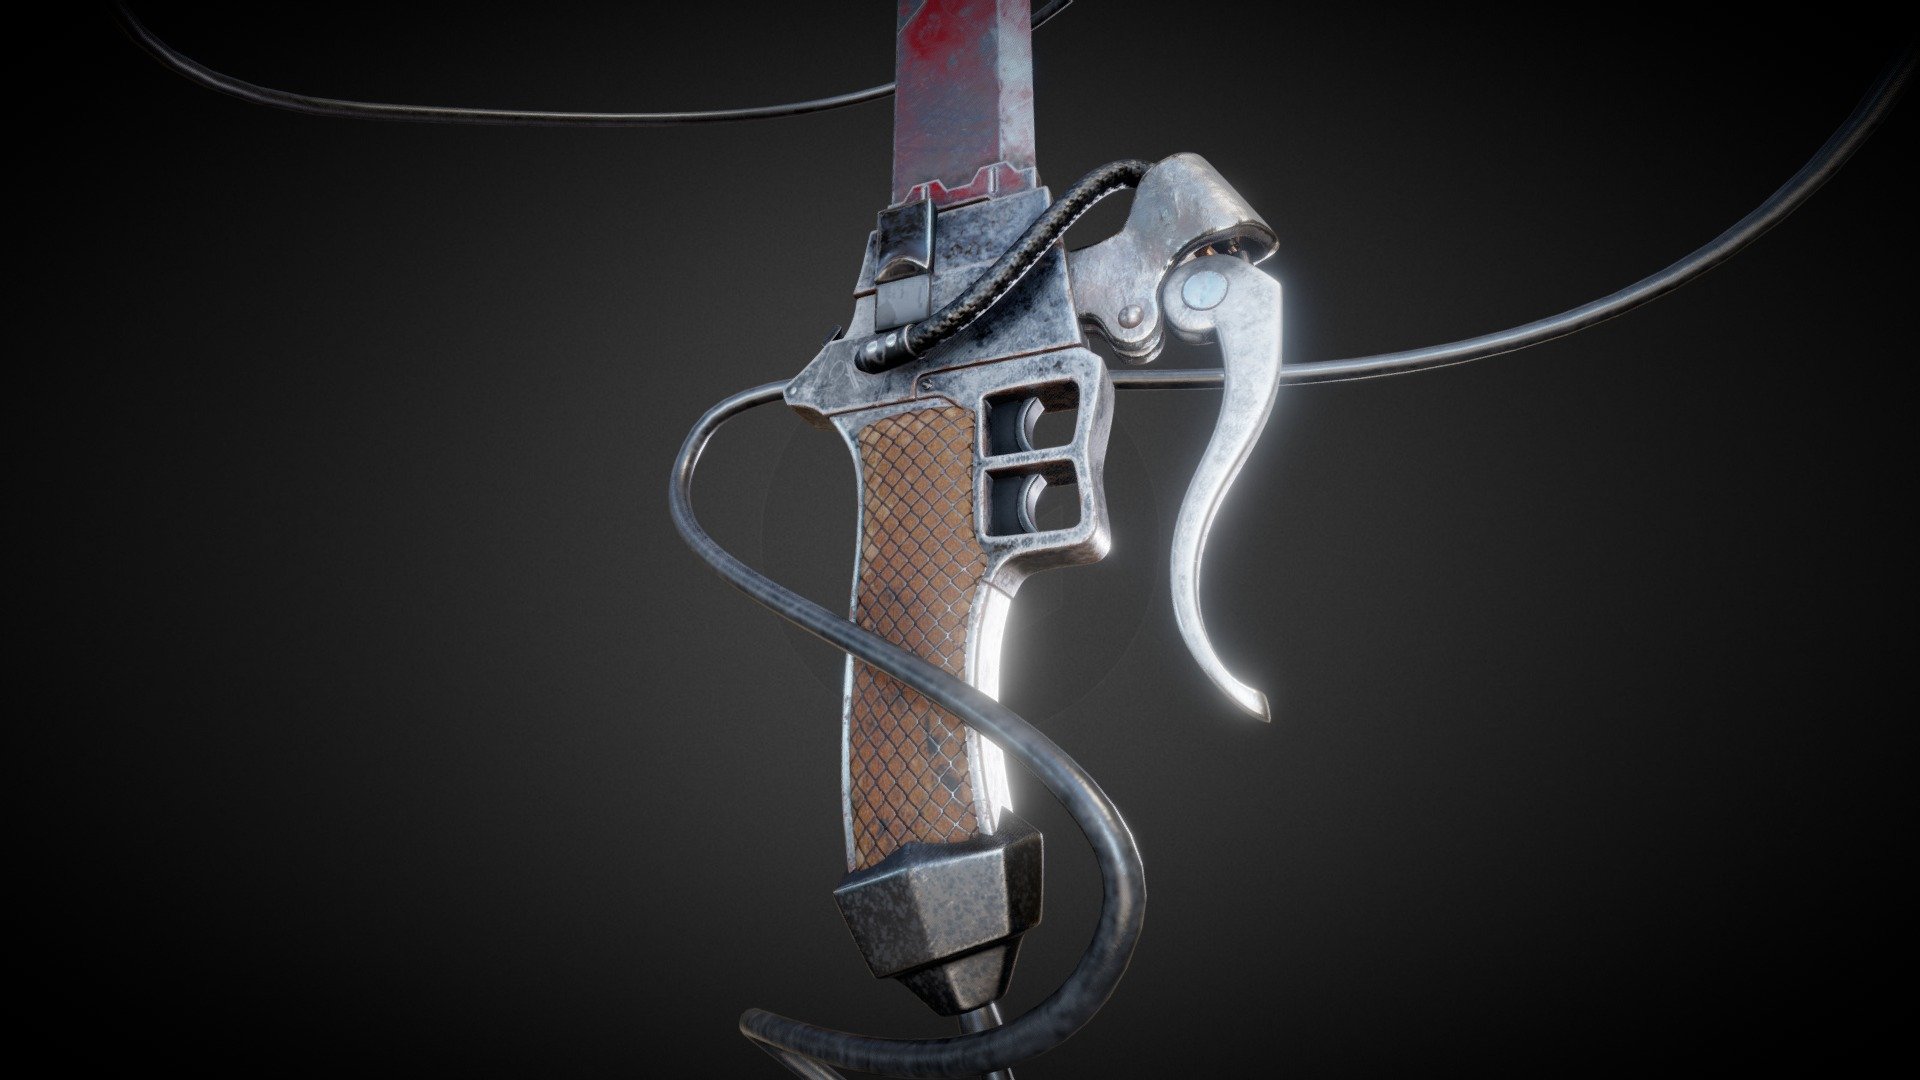 Swords made of ultrahard steel are the main weapon used in the fight against the Titans. These one edge blades are included as part of the vertical maneuvering equipment. They are the only portable weapons that are strong enough to pierce the body of a Titan

Made with Blender and textured using Substance Painter

https://www.artstation.com/artwork/nYxDqX - Attack On Titan ODM-gear Blade - 3D model by Krulknul (@nietdaan) 3d model